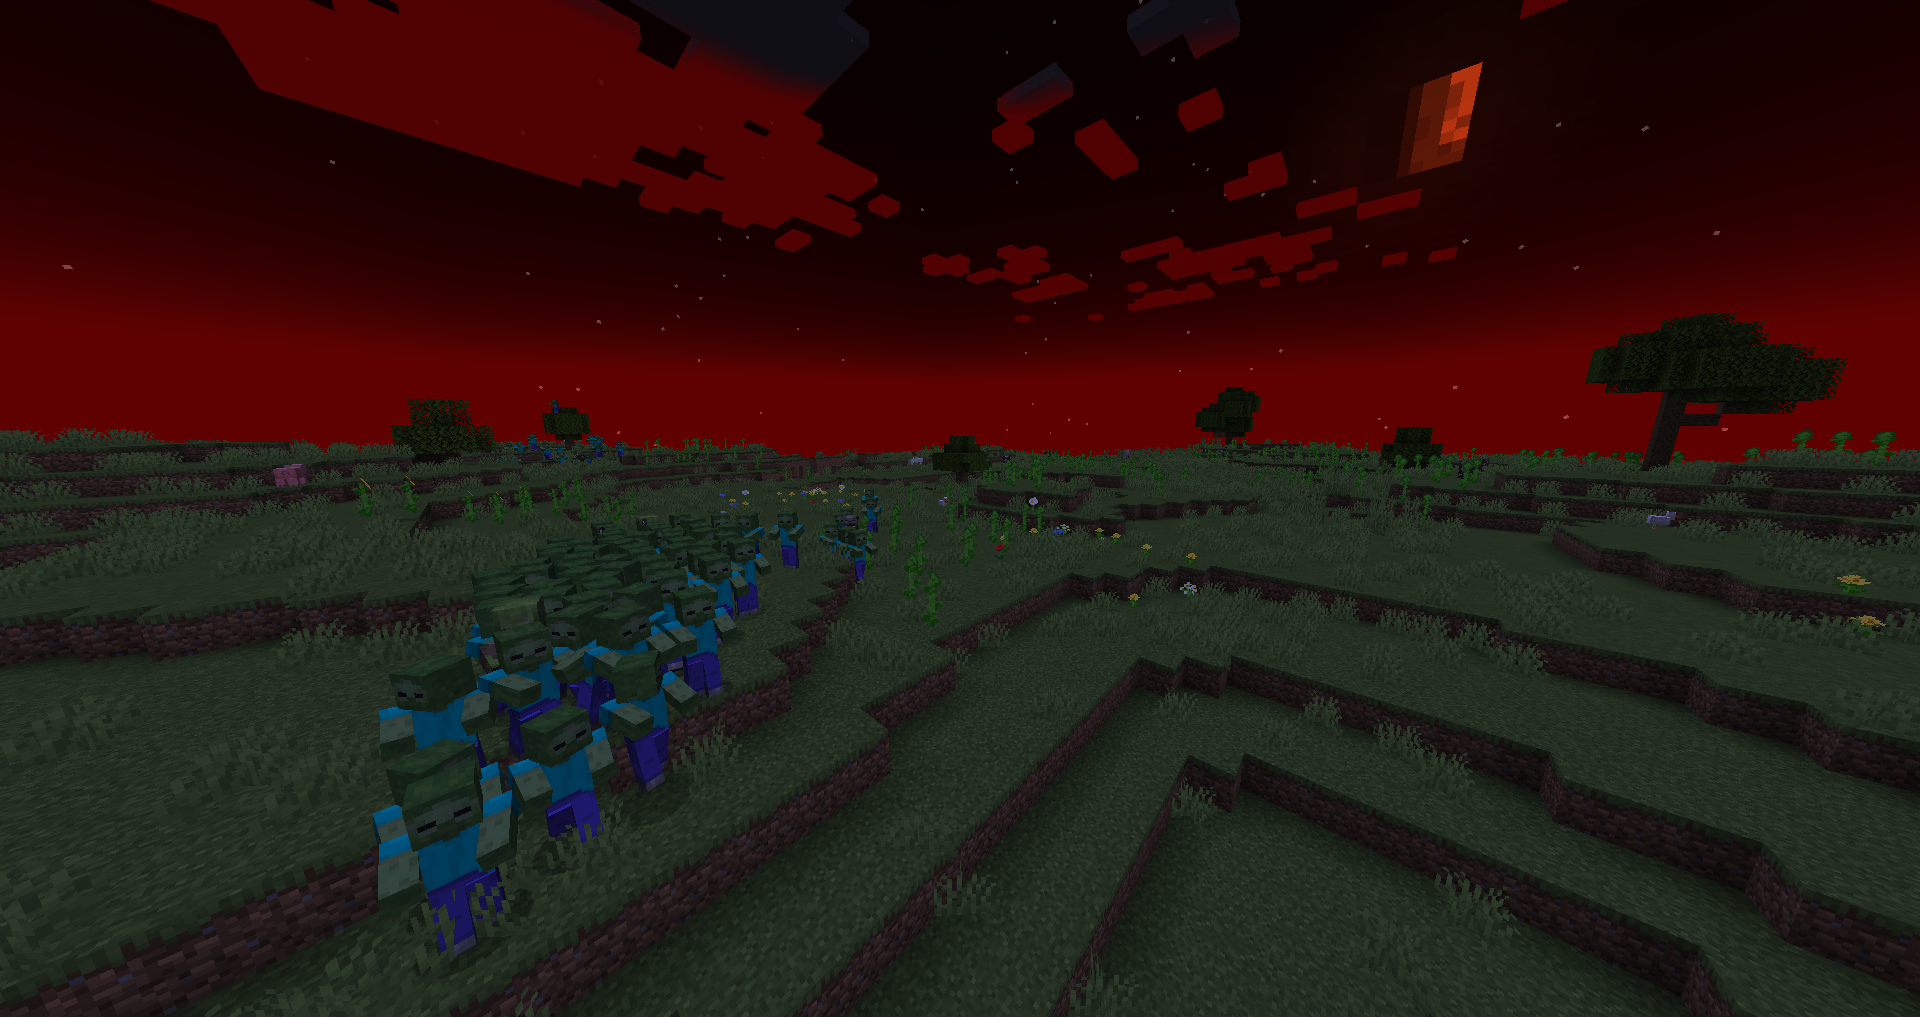 A group of horde zombies tracking the player down with the new 1.3.1 horde night sky renderer in the background.